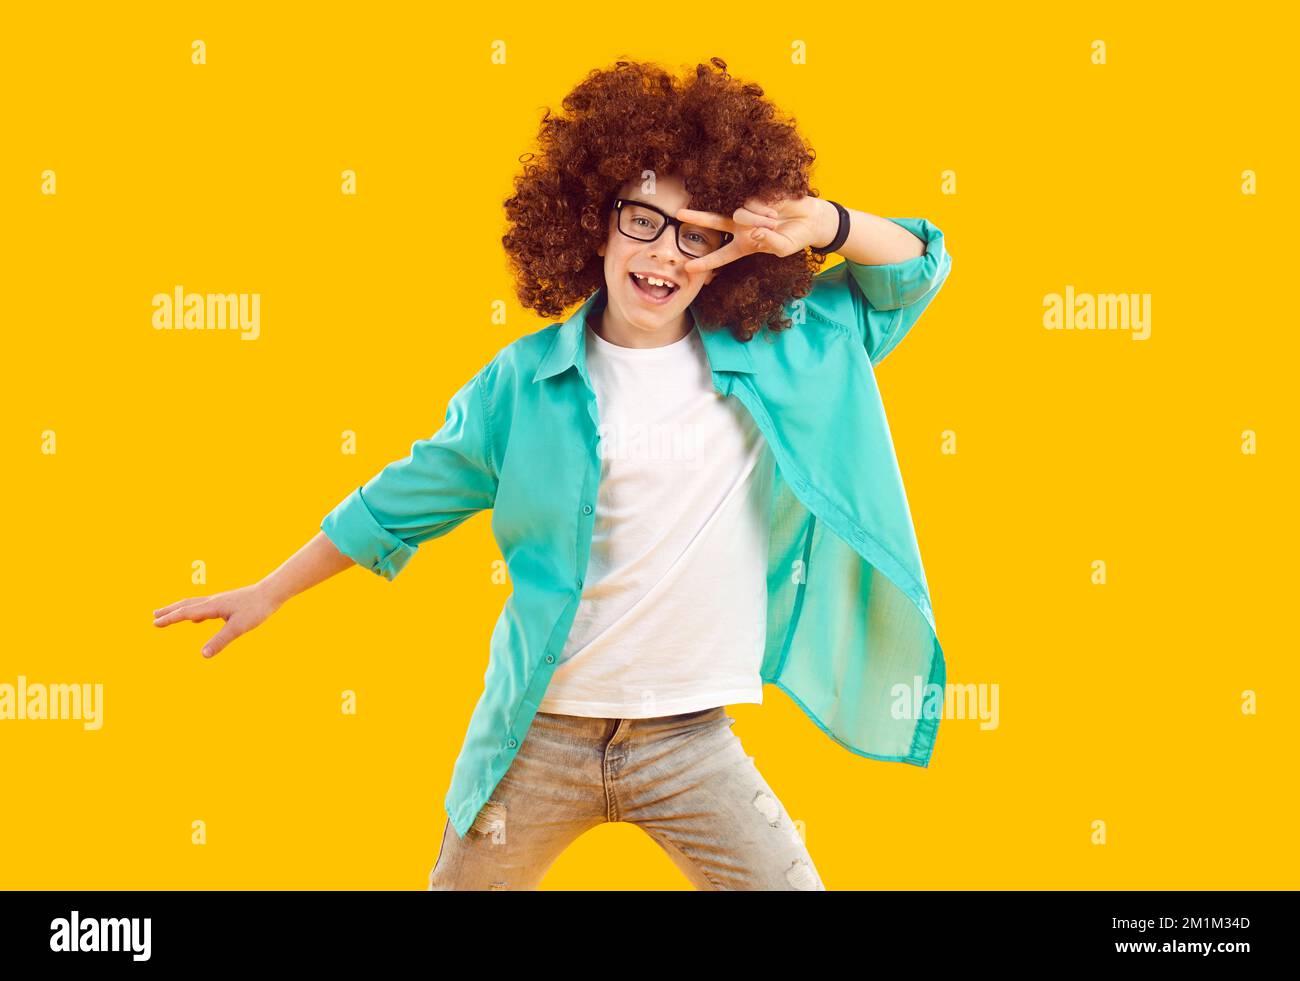 Happy funny cheerful little boy in curly wig dancing on orange studio background Stock Photo